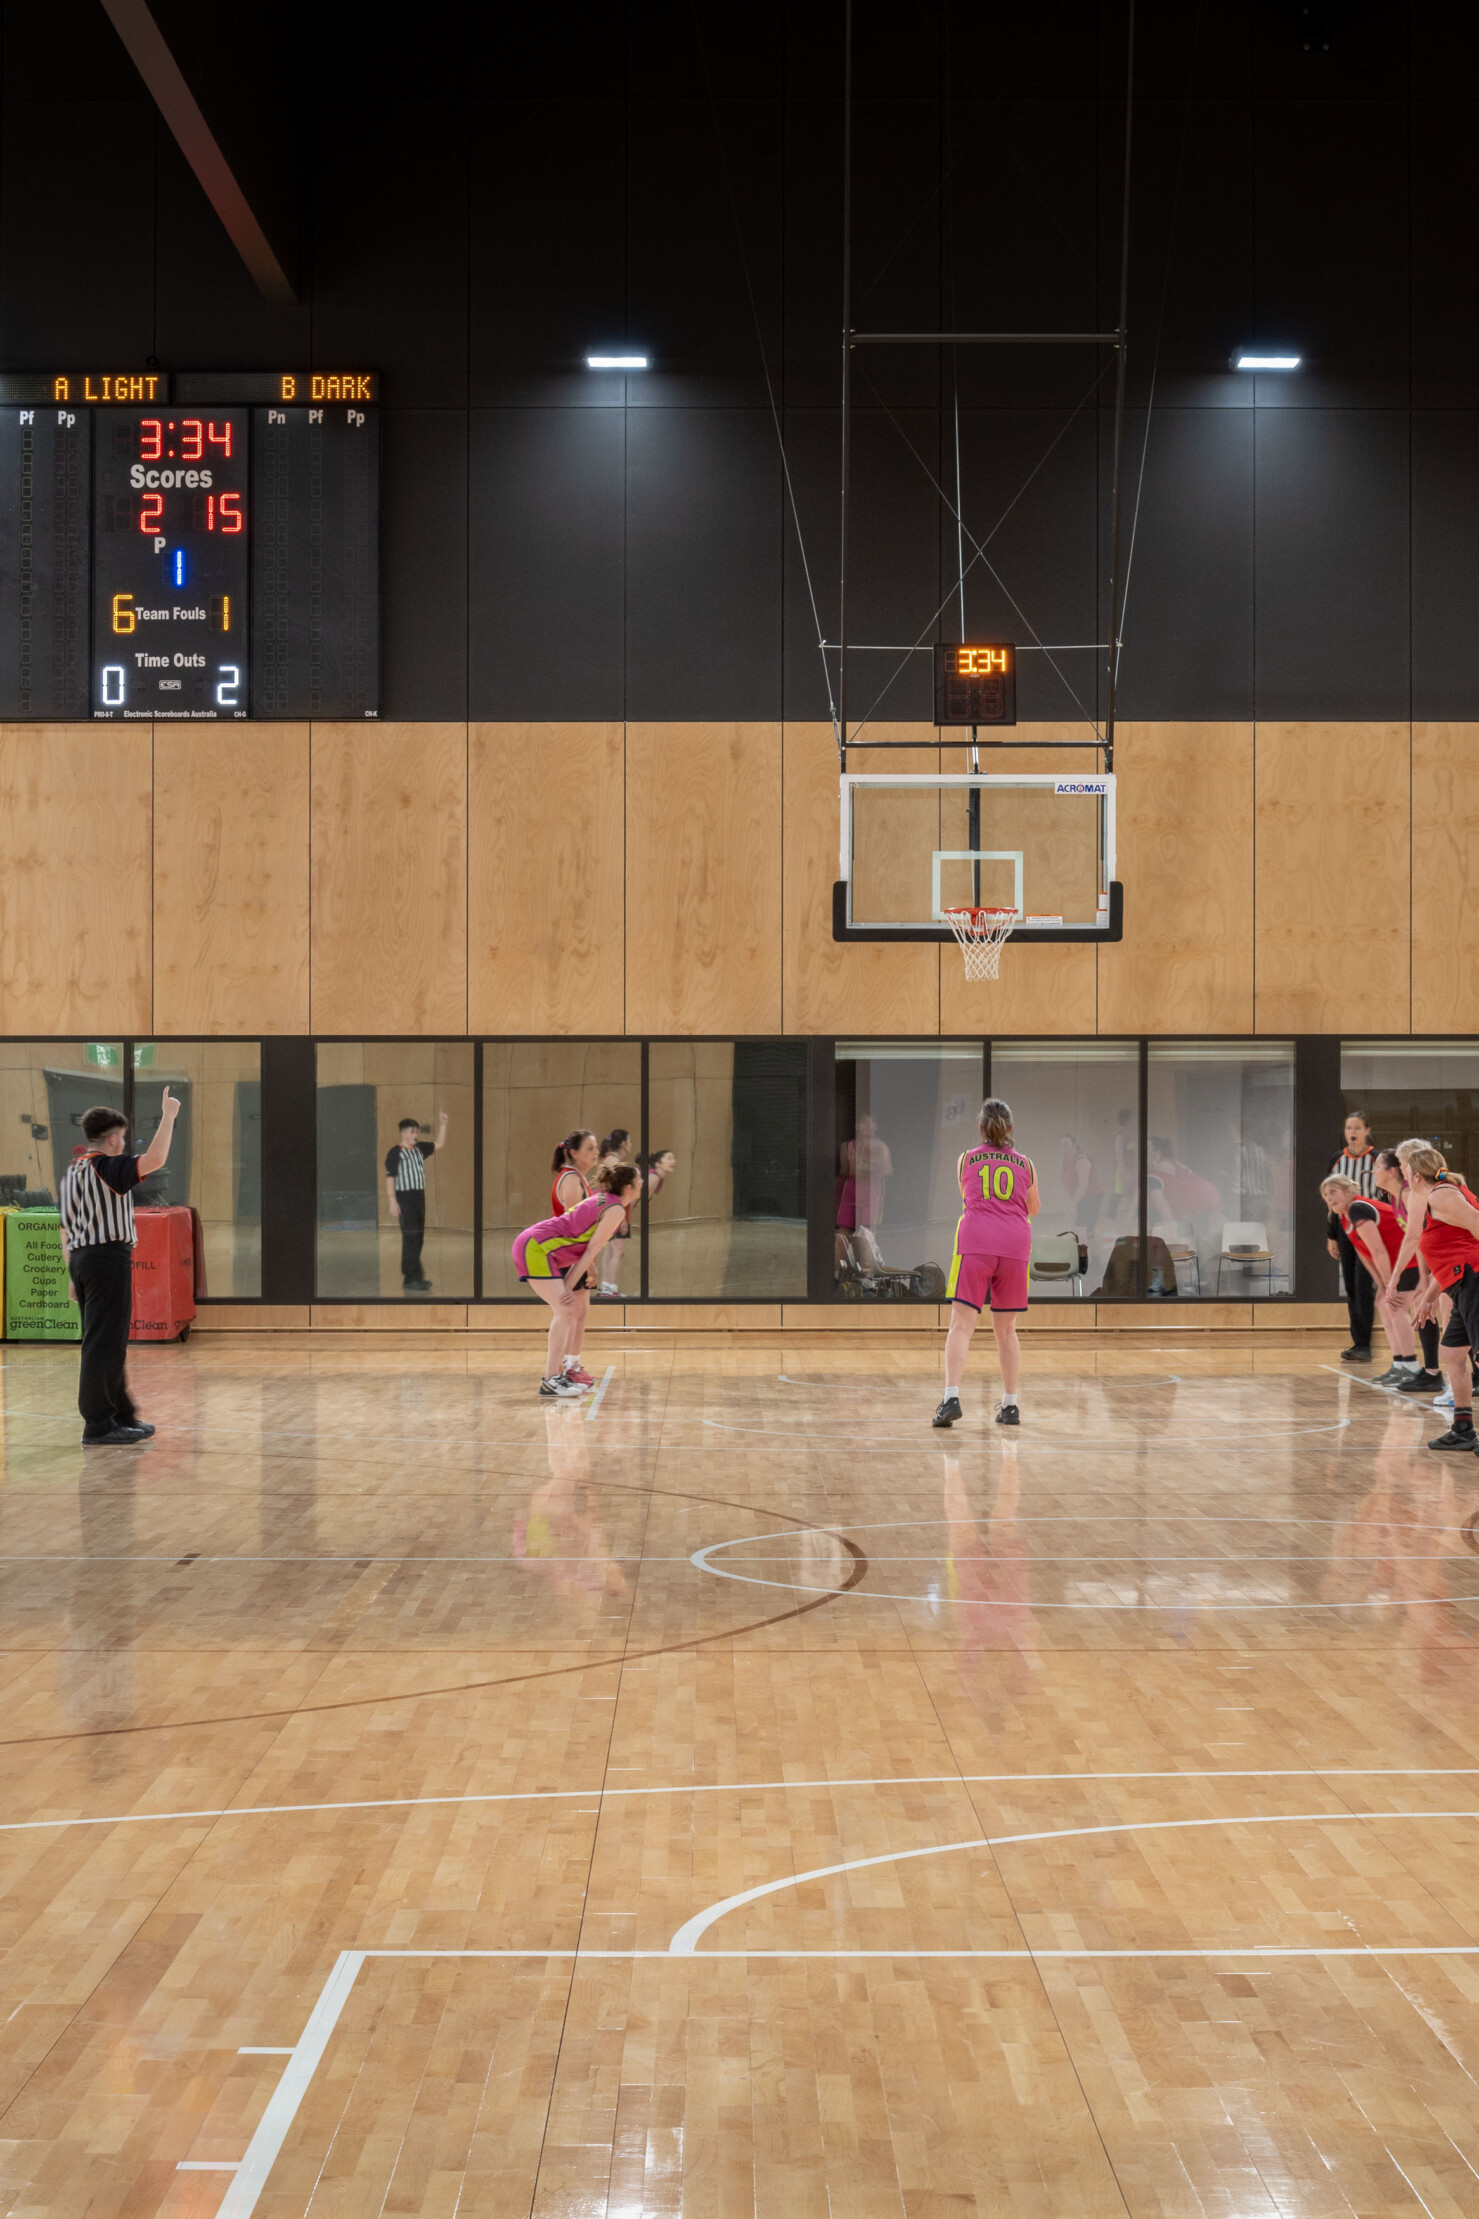 Female basketballers in pink uniforms crouch at the goals as a penalty shot is thrown by a player. An umpire stands by refereeing the match on the maple lined courts.